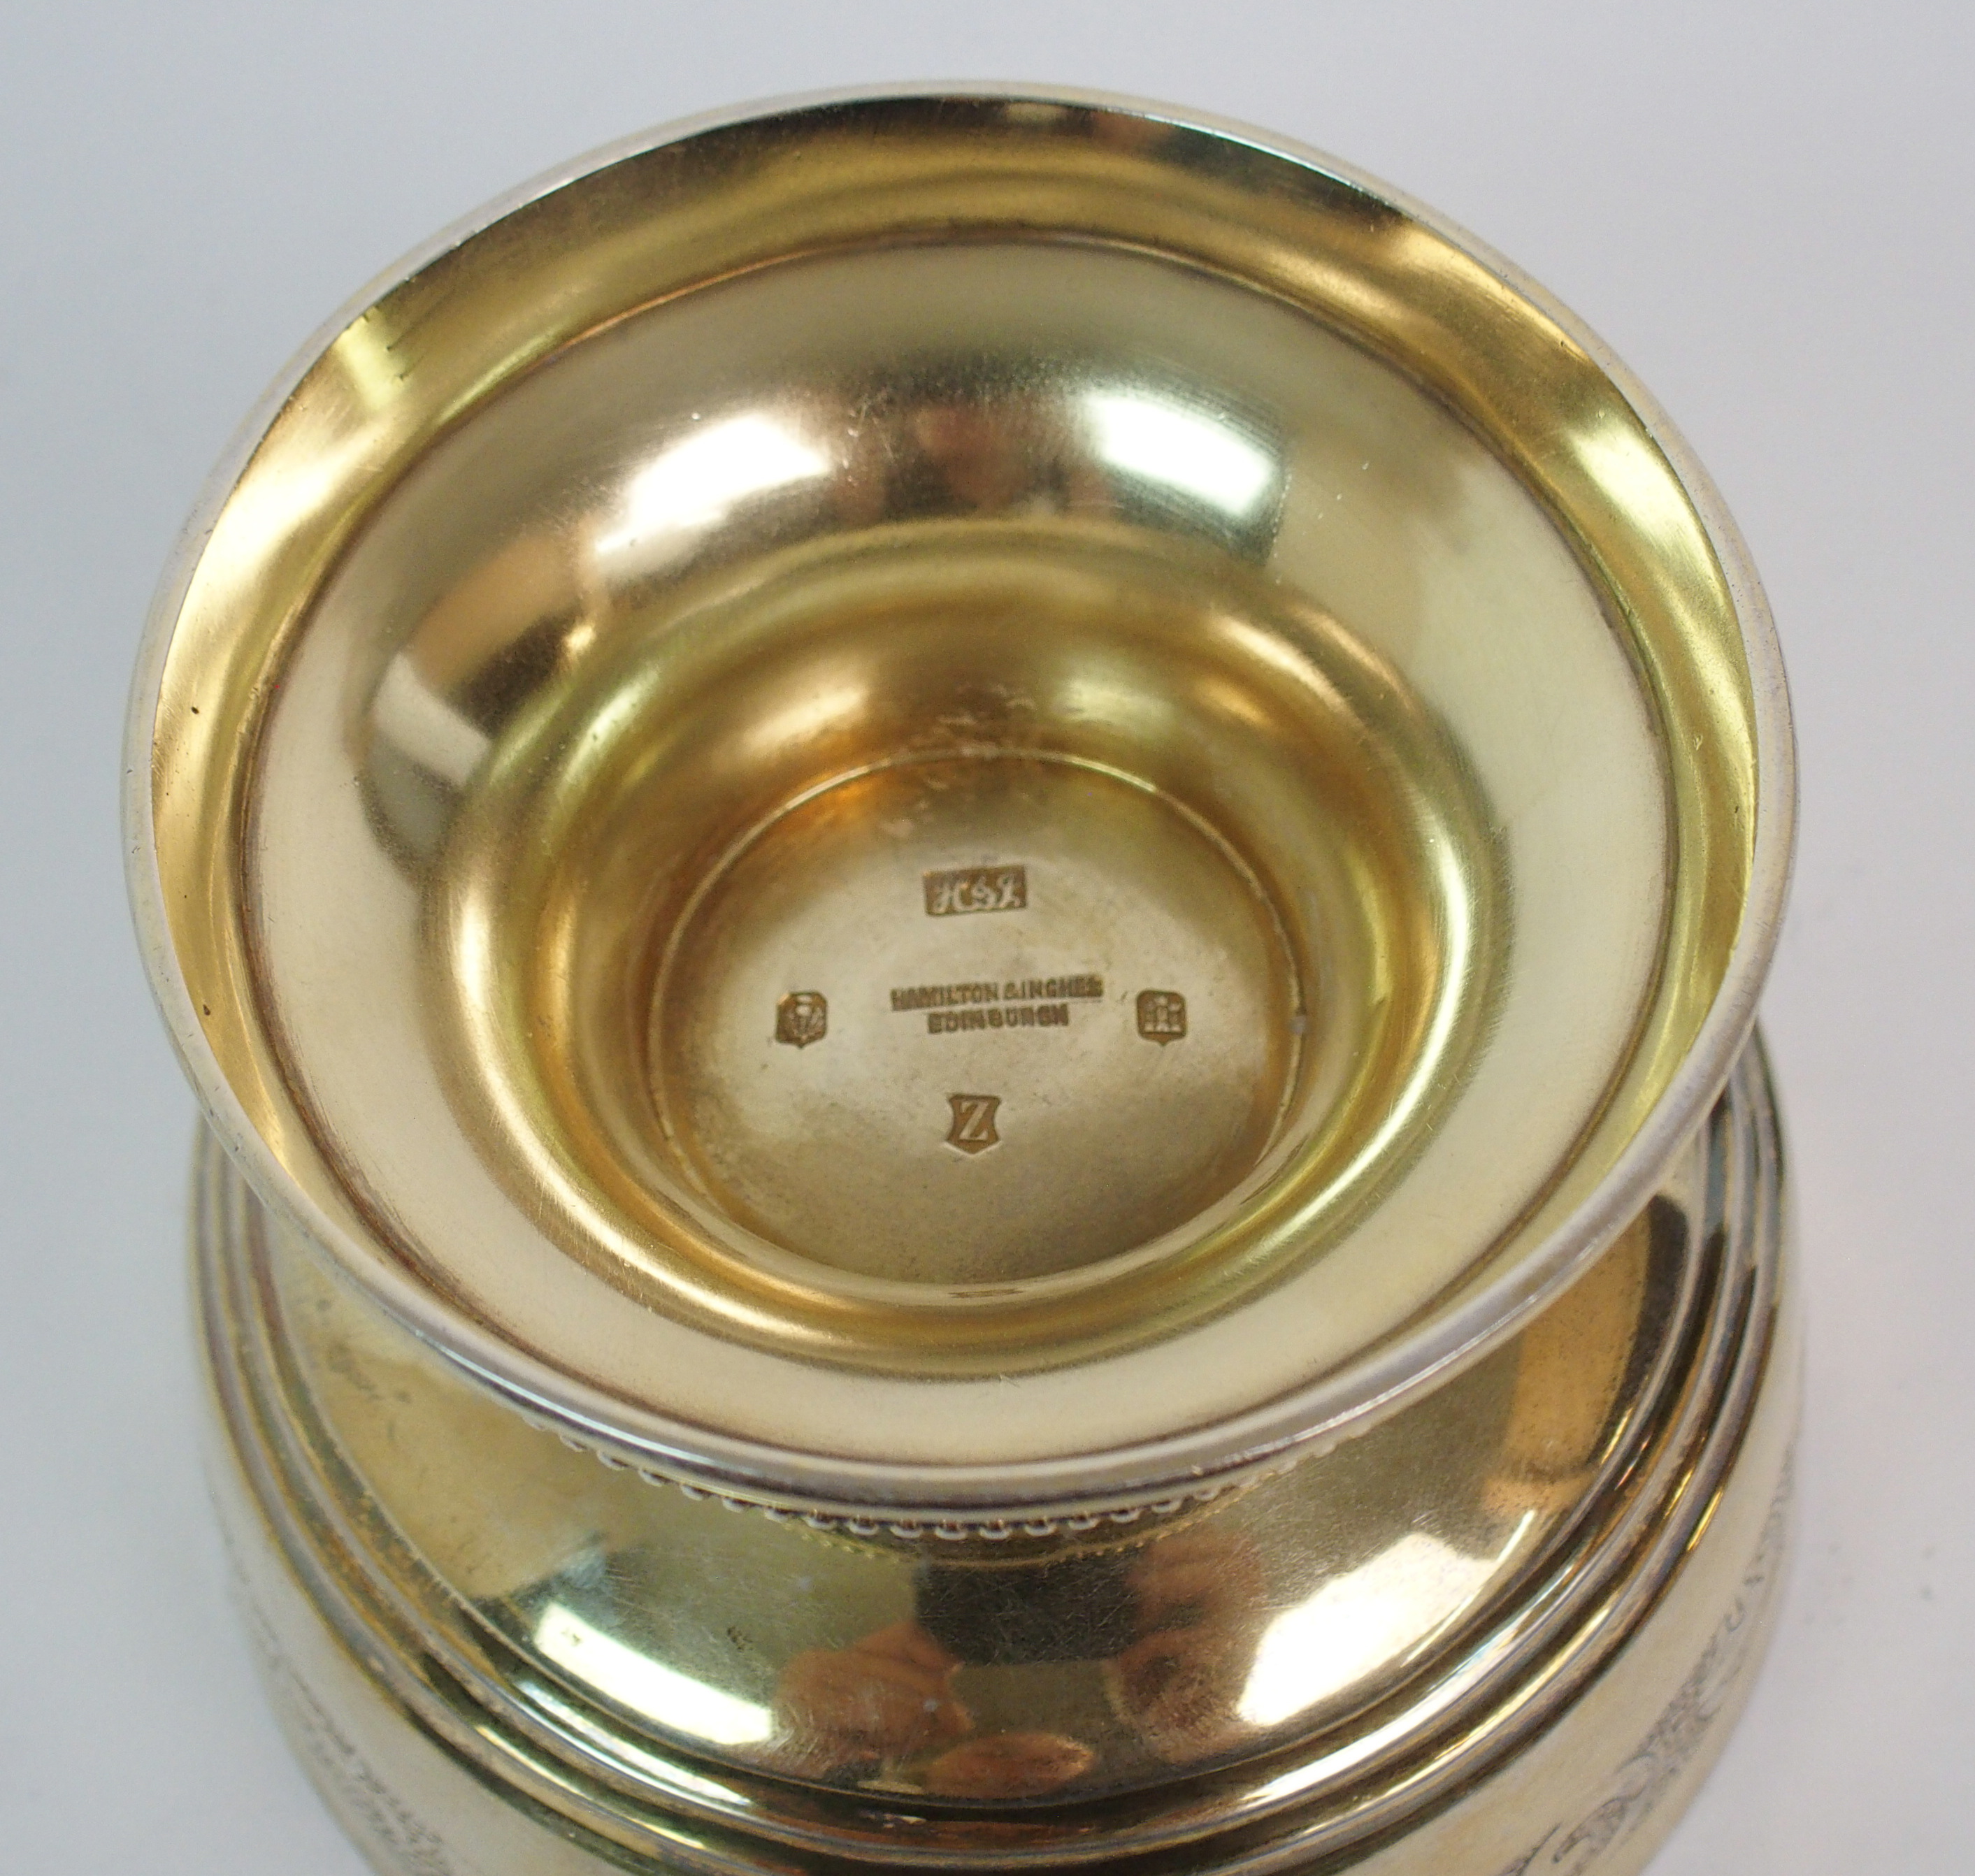 A SILVER GILT CHALICE by Hamilton and Inches, Edinburgh 1930, of circular form with "Sol Deo Honor - Image 7 of 9